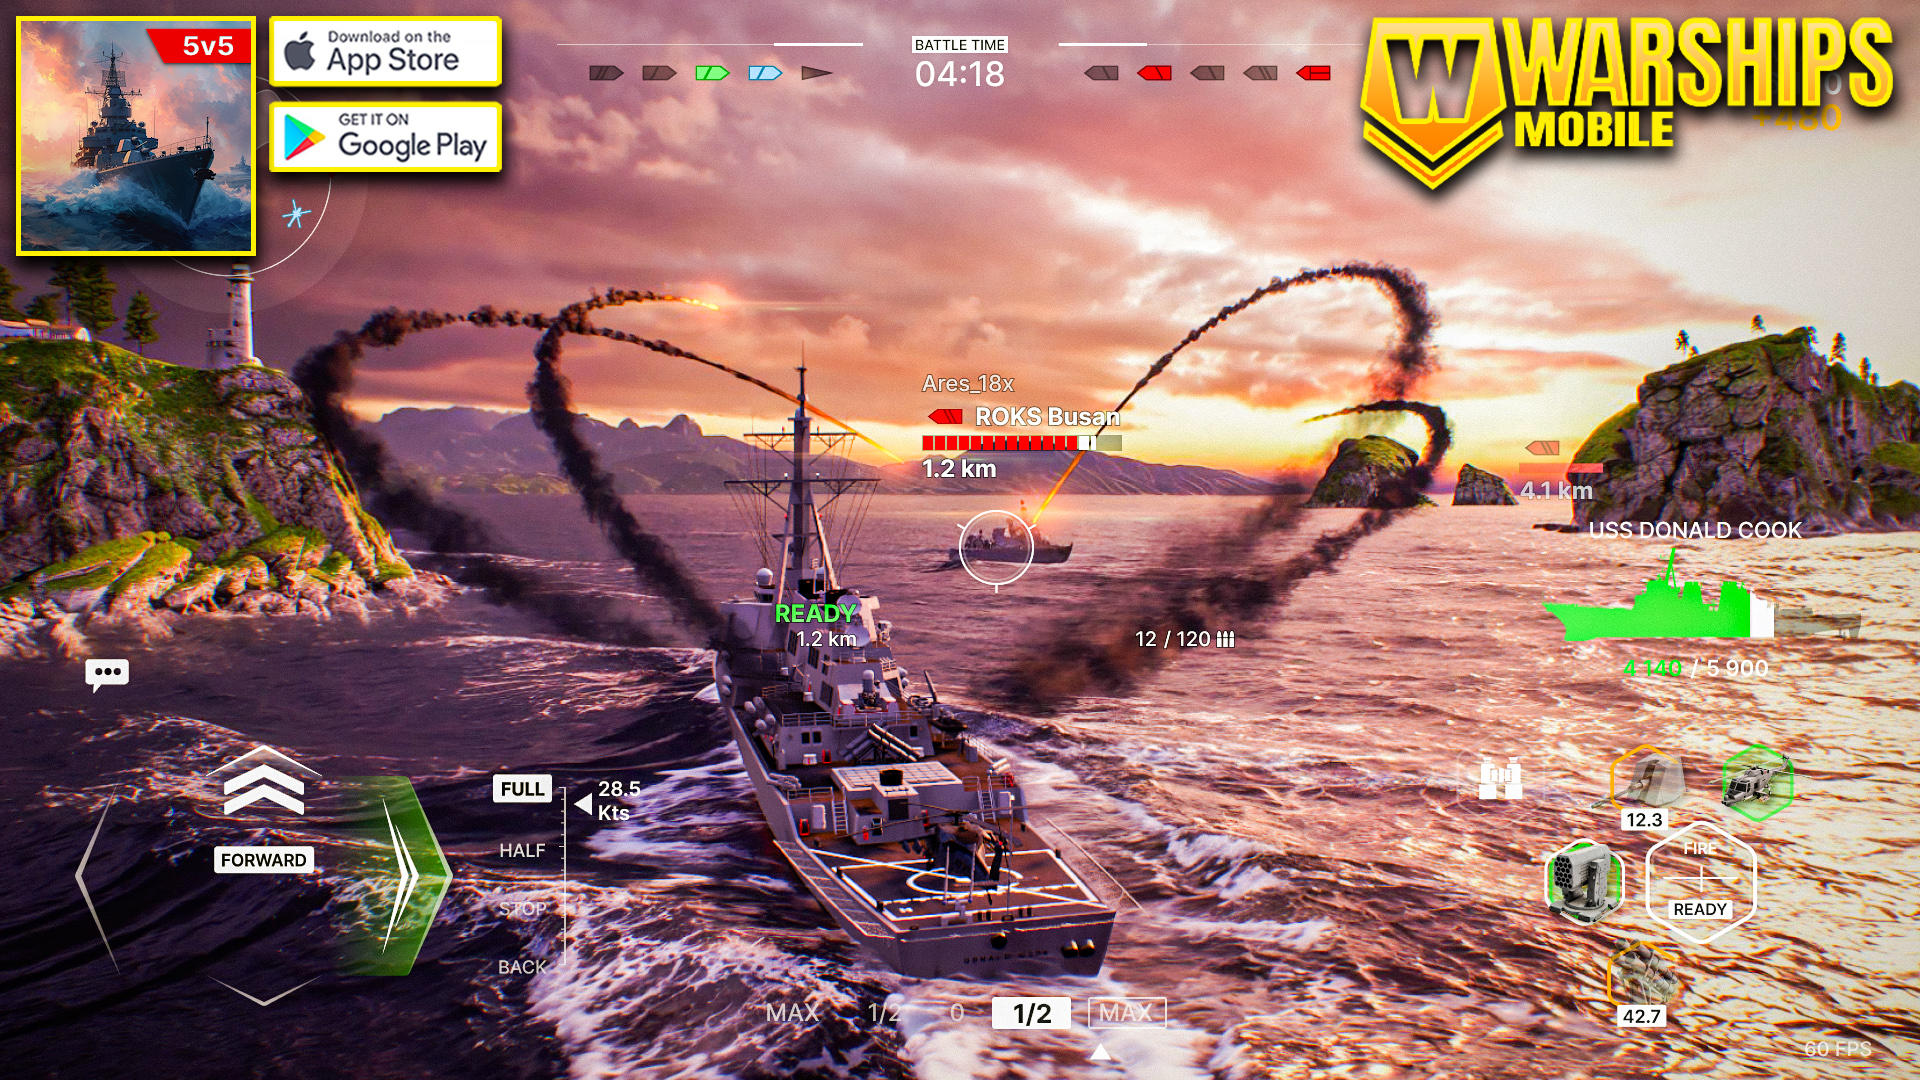 Warships Mobile 2: Open Beta // Modern Warship Gameplay (Android & iOS)